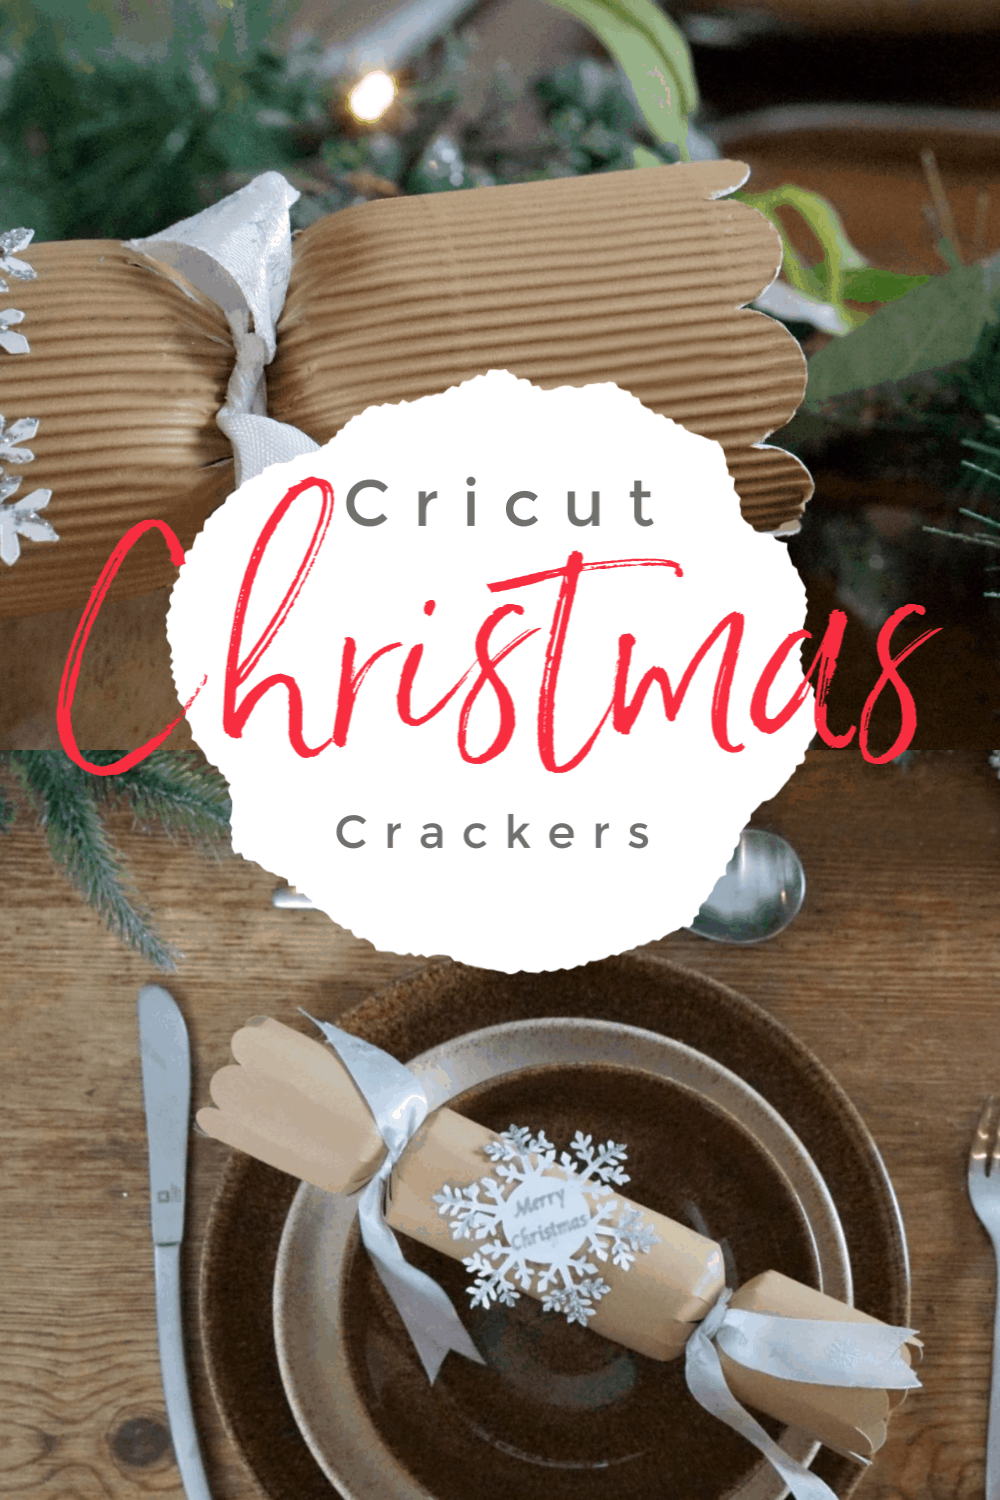 How To Make Christmas Crackers With The Cricut Maker, Cricut Christmas Projects